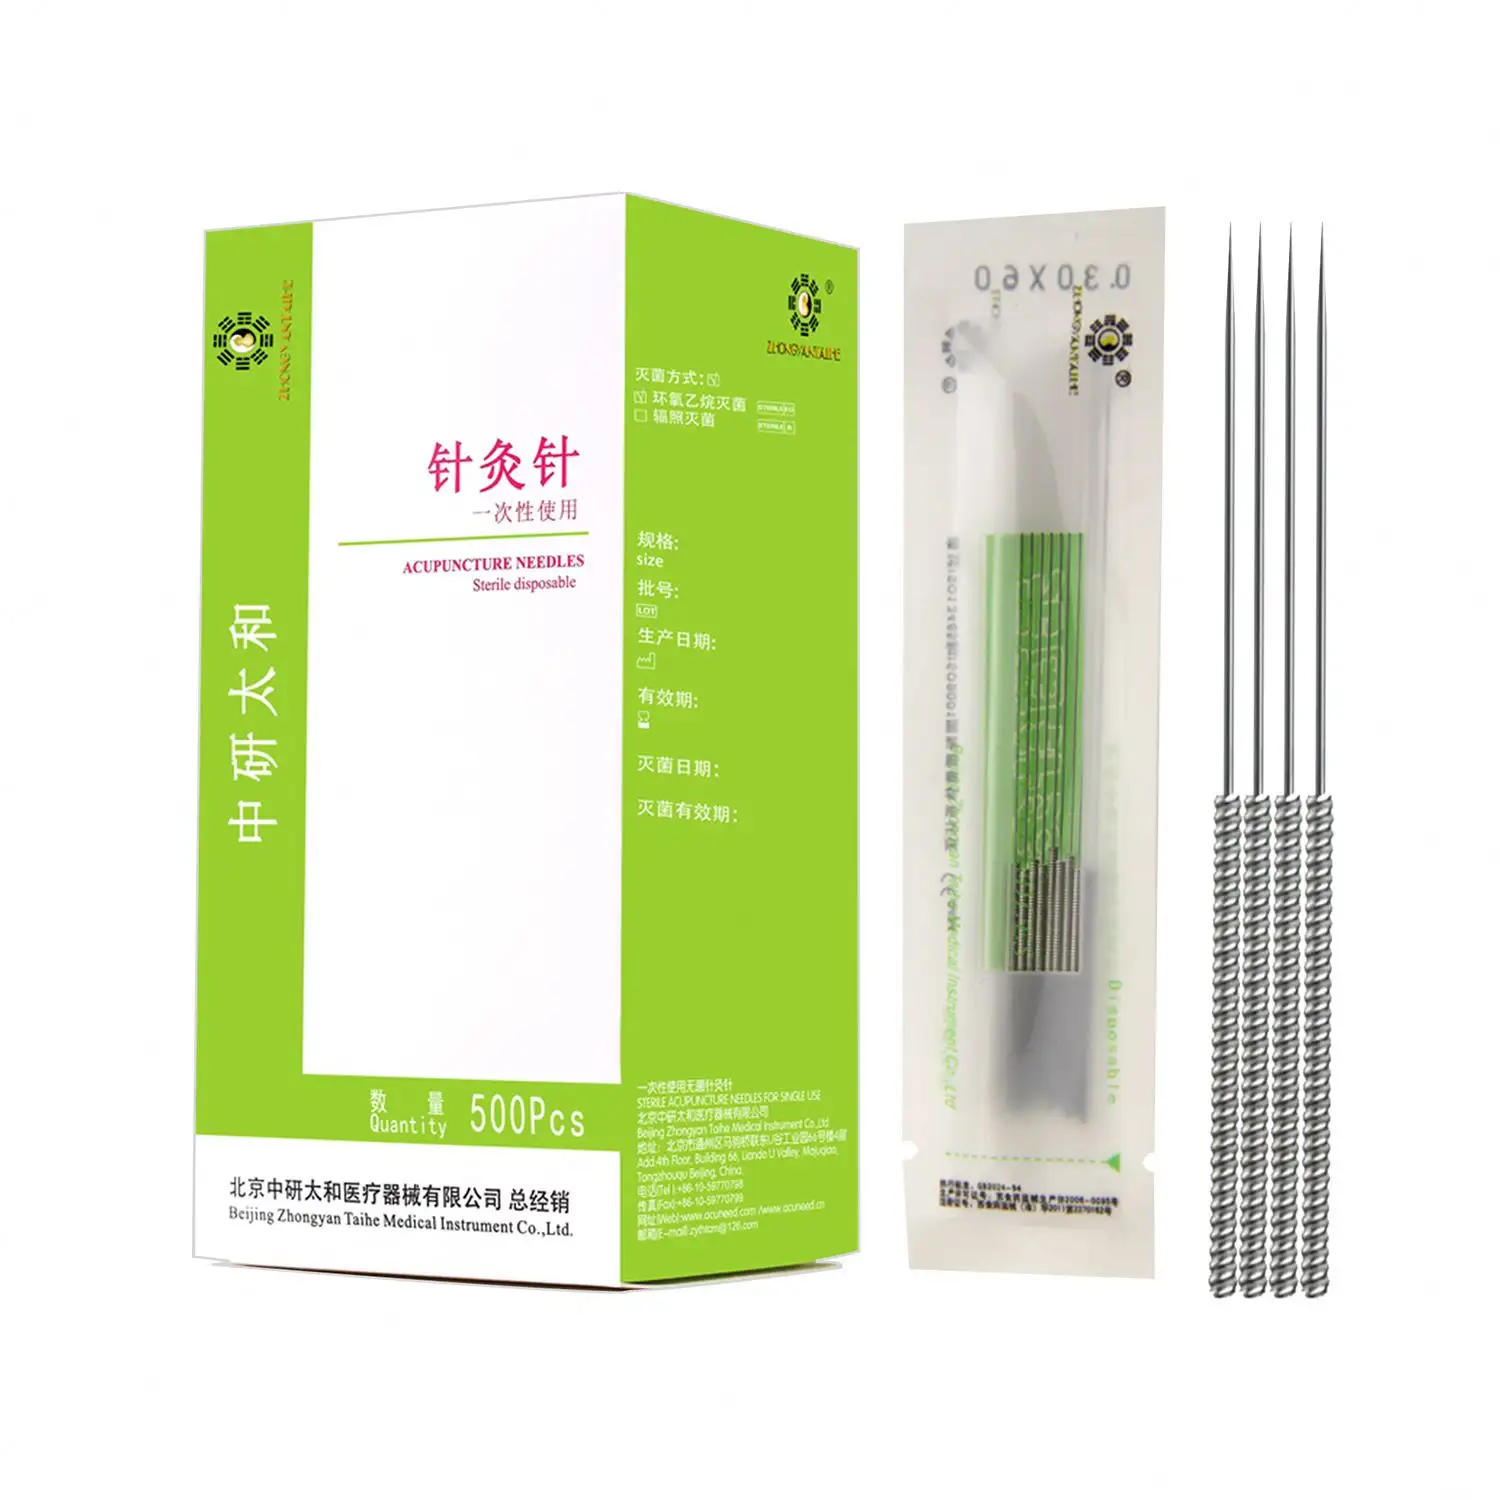 zhongyan taihe Disposable Sterile acupuncture needle For Single Use from China